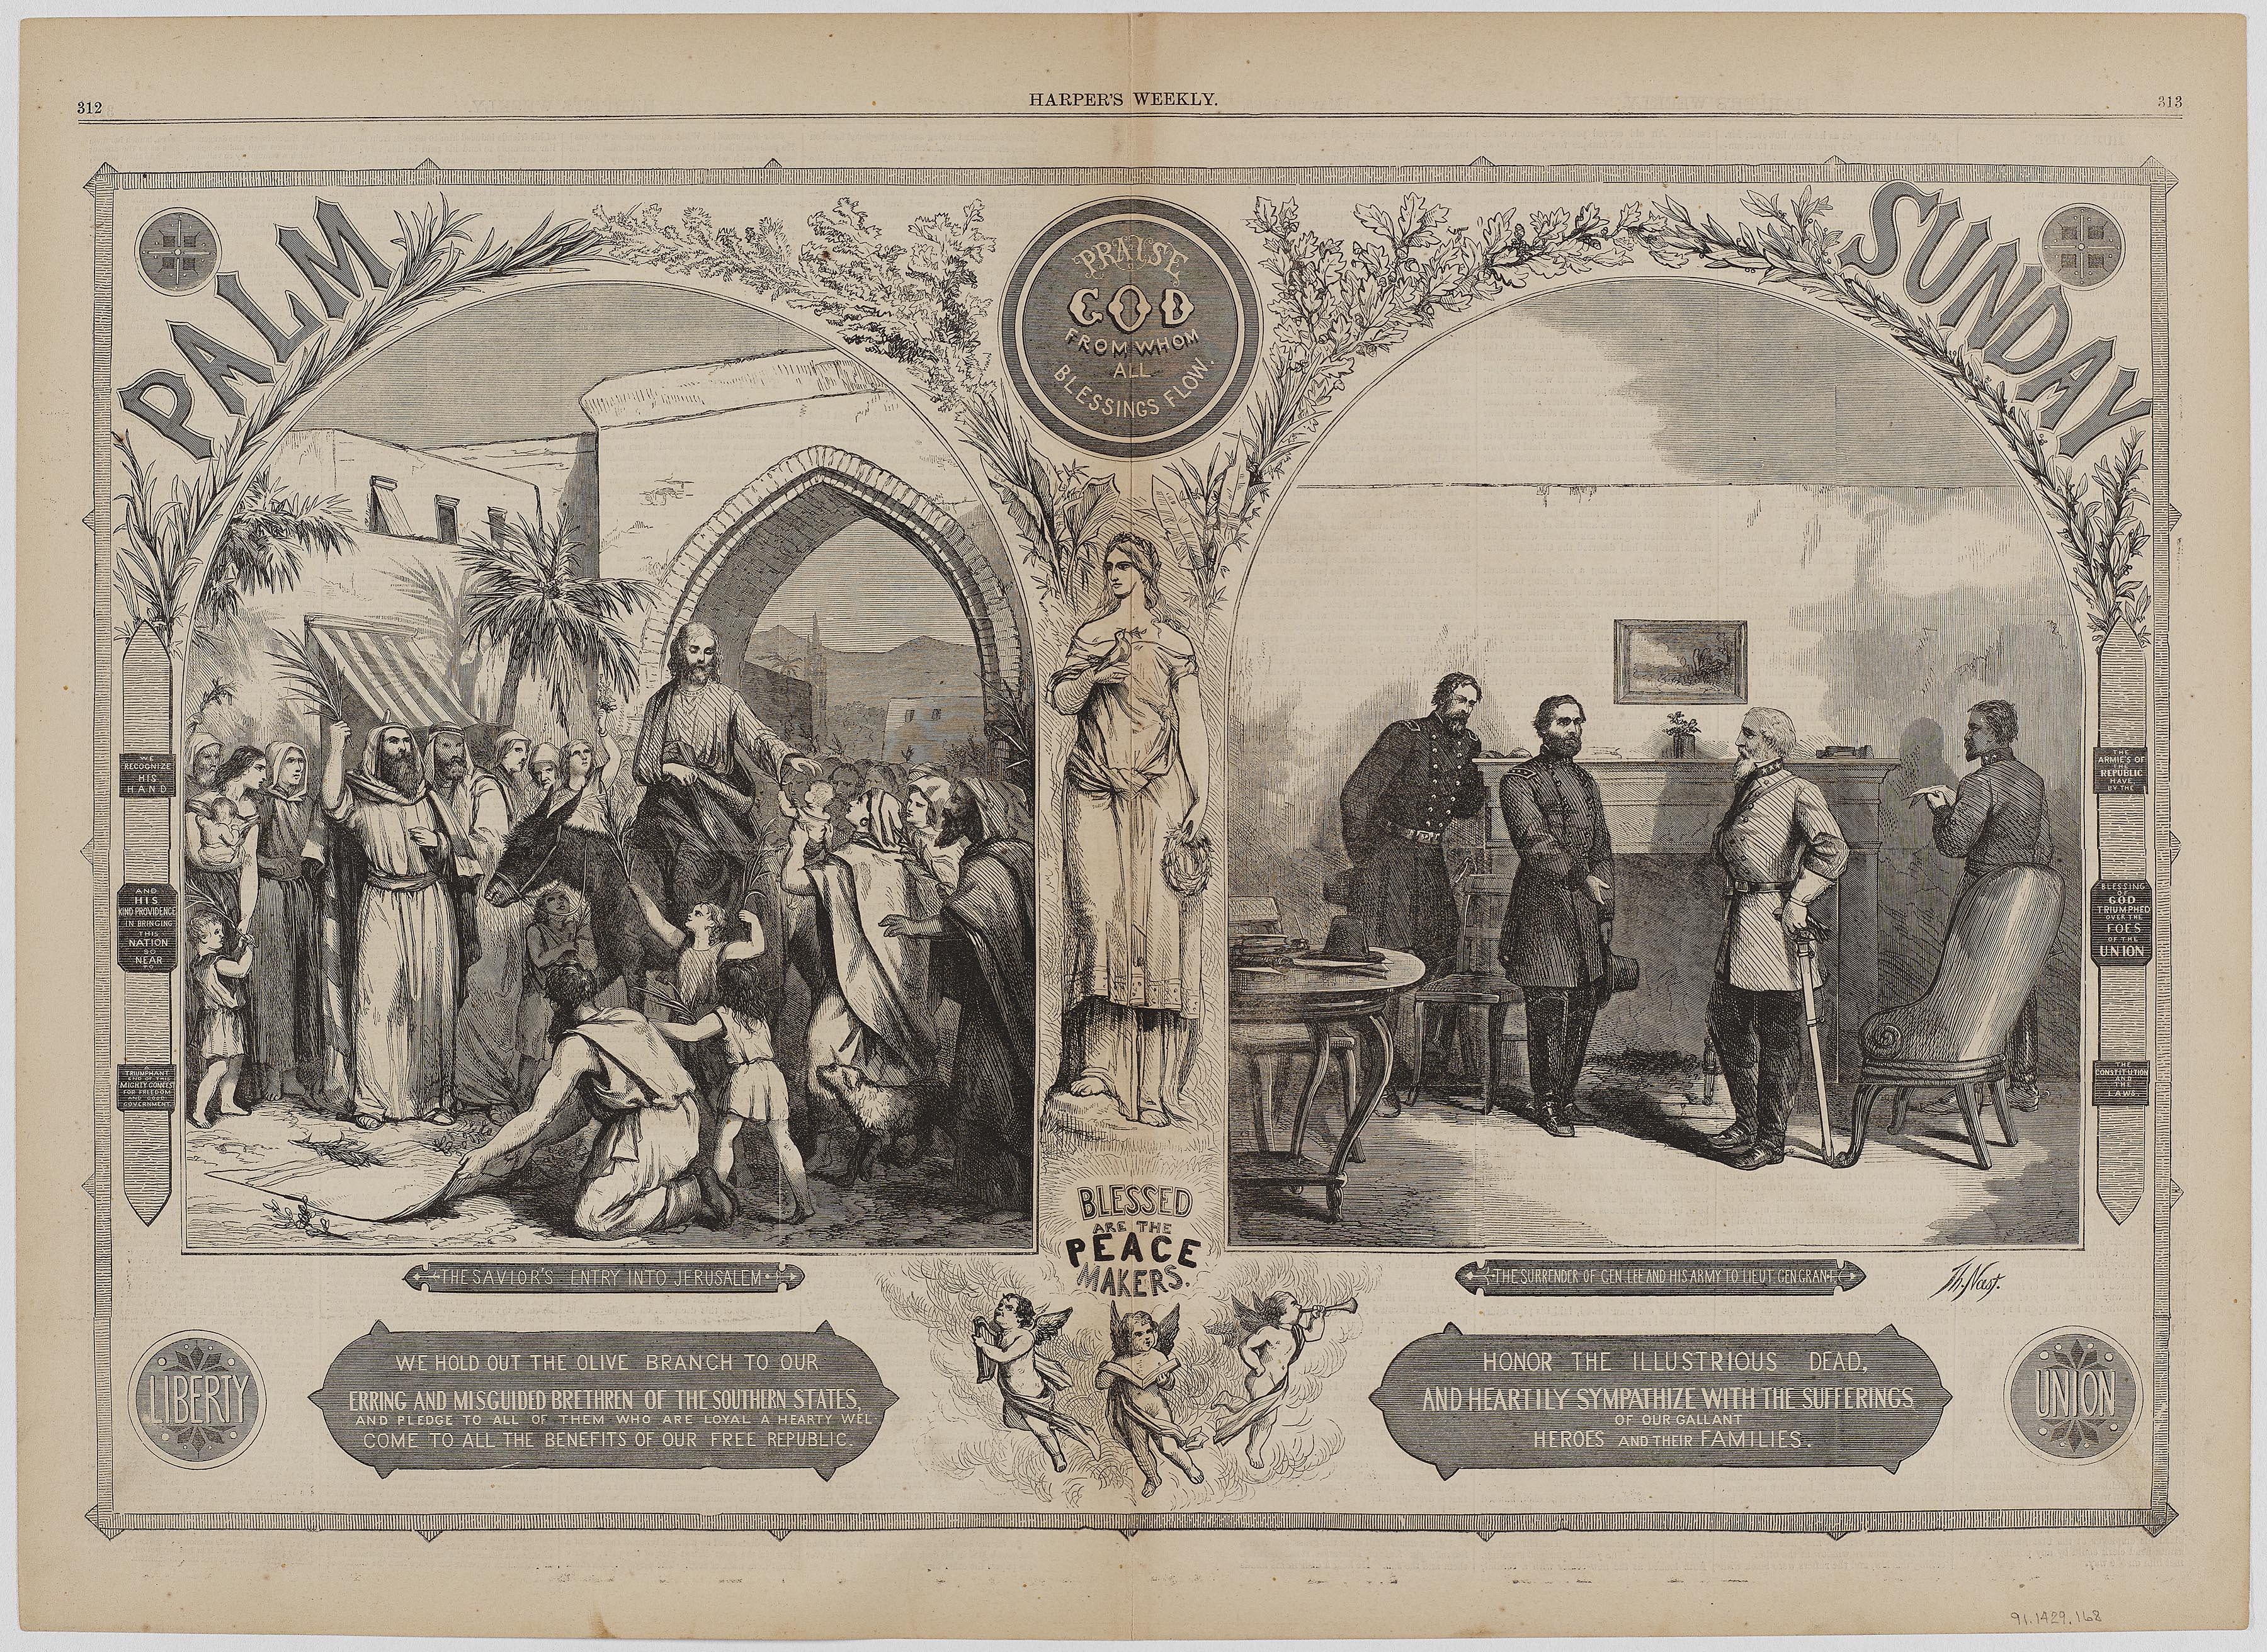 Thomas Nast's 'Palm Sunday' from Harper’s Weekly Magazine, May 20, 1865 (Courtesy of The Museum of Fine Arts, Houston: gift of Dr. Mavis P. and Mary Wilson, Kelsey)